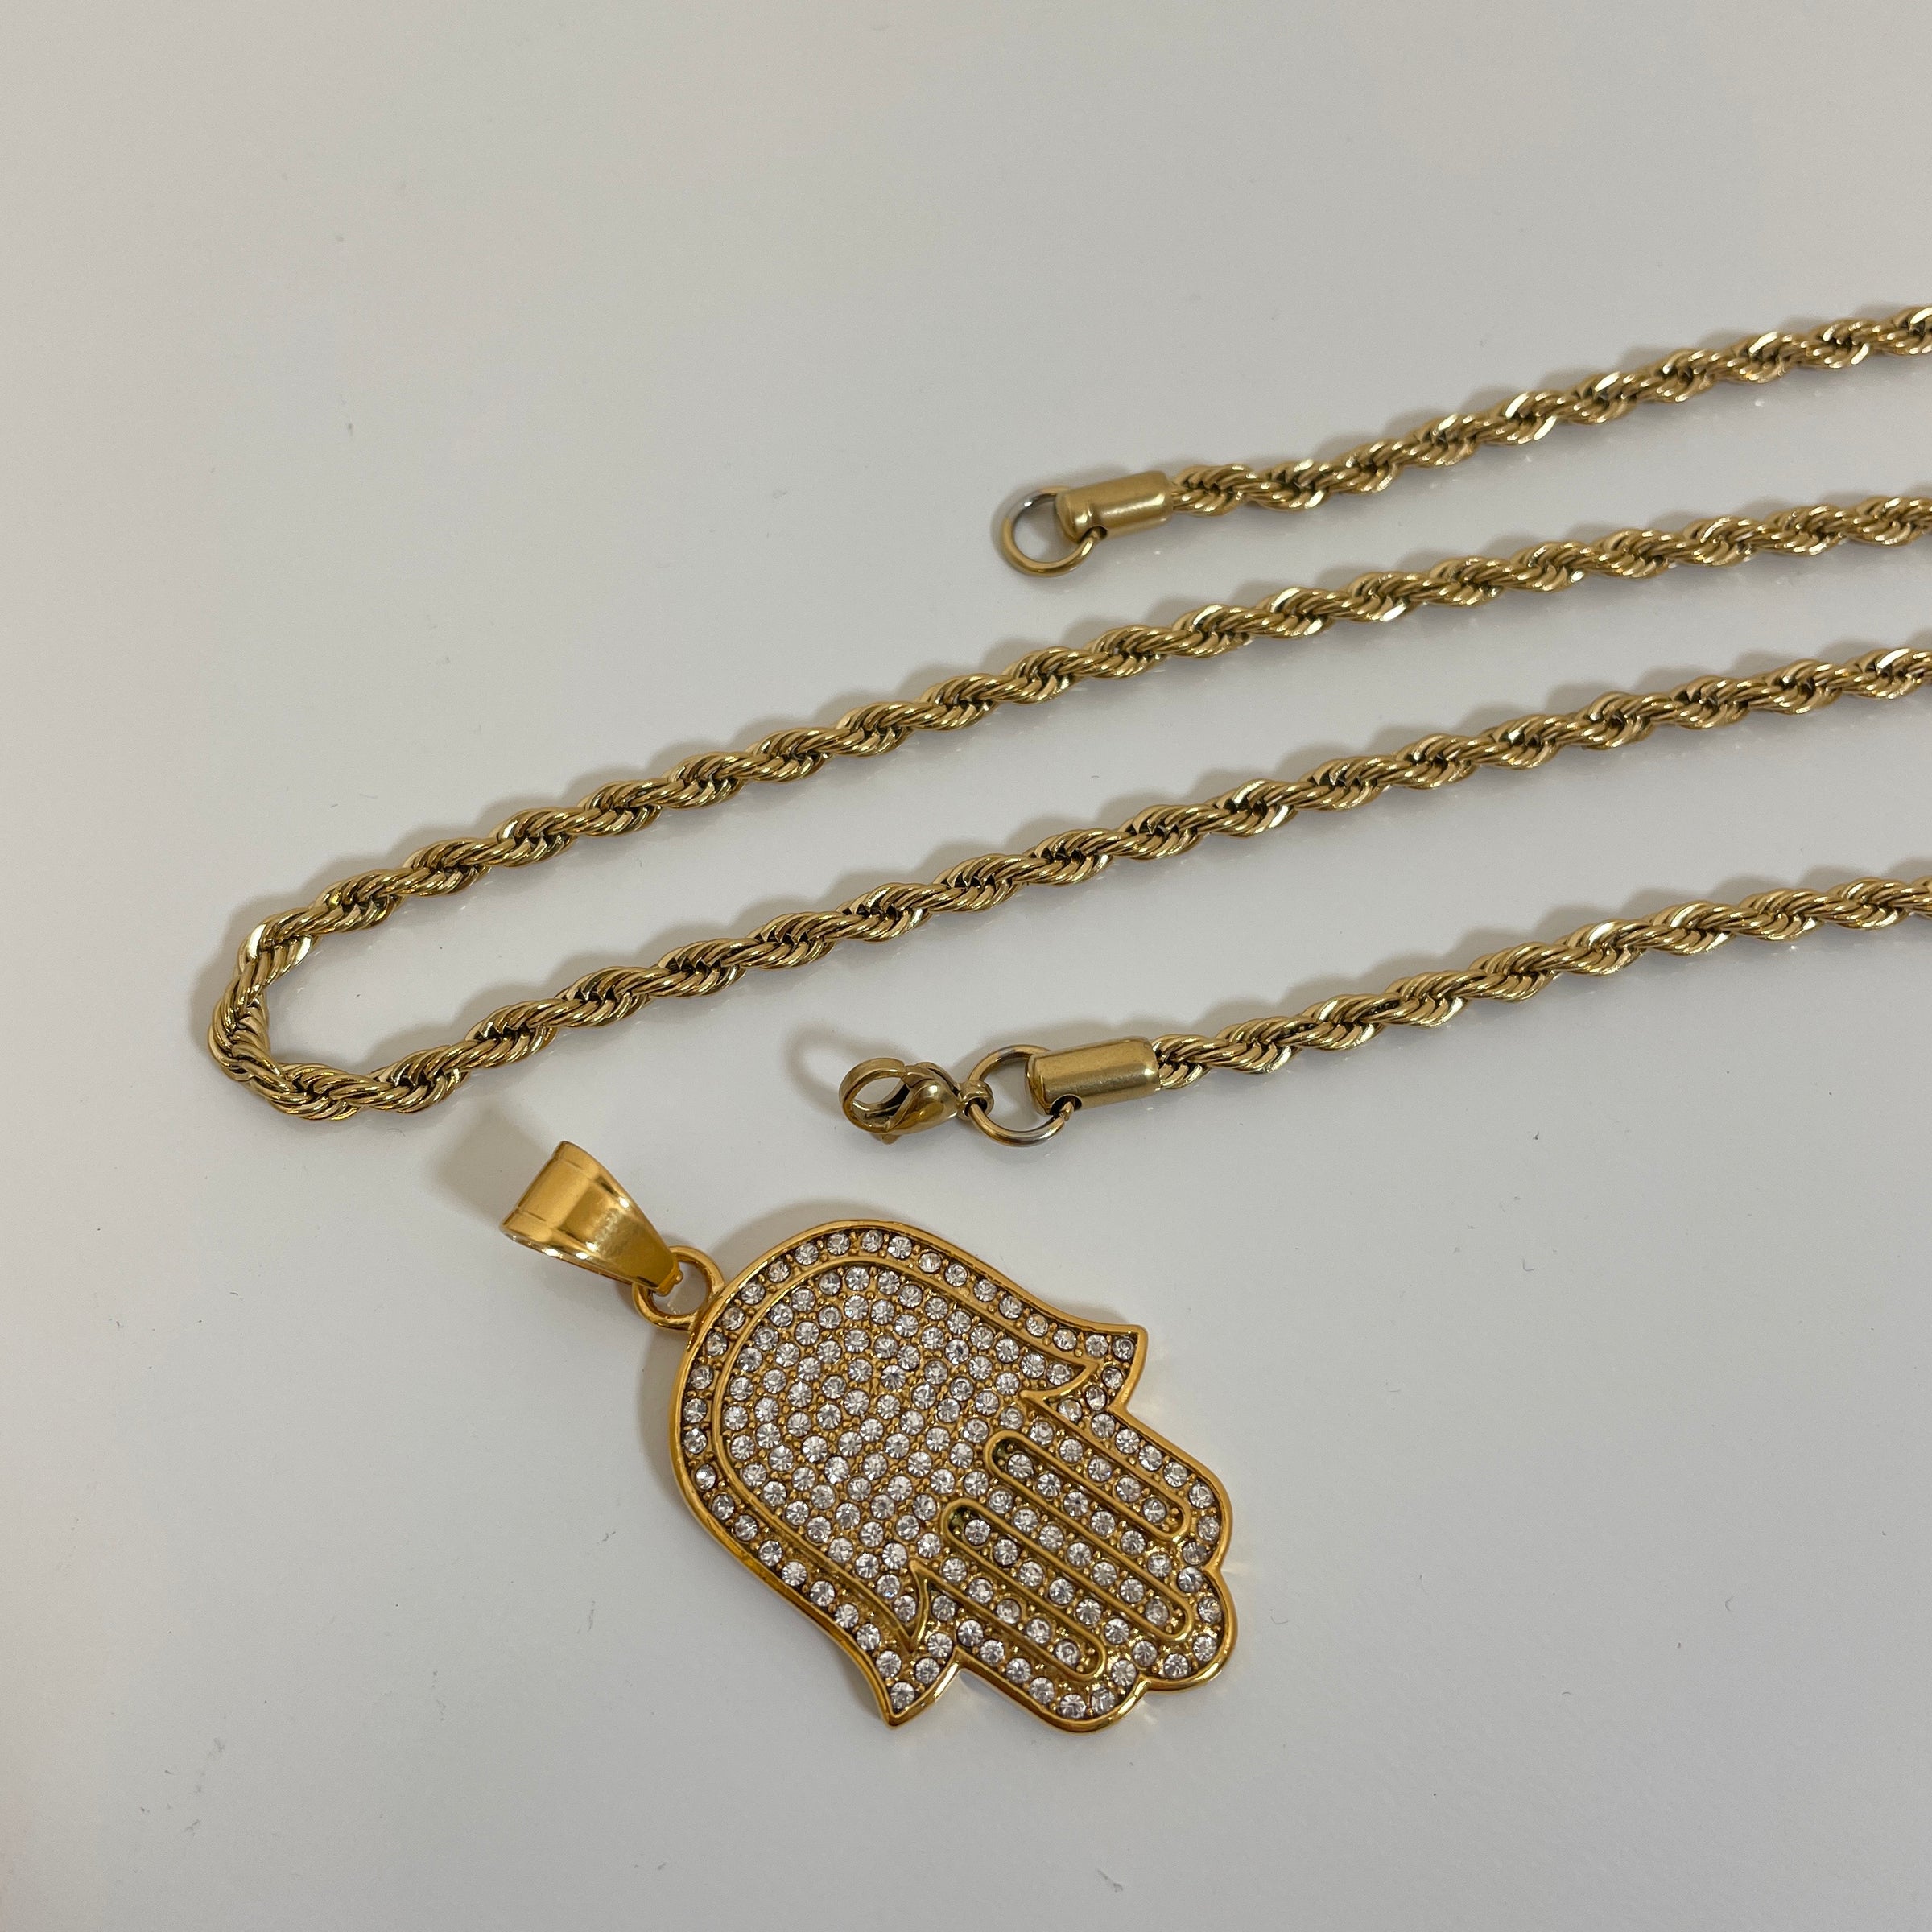 Hamsa Pendant with 14K Gold Filled Rope Necklace 4mm 24" Chain Set for Men or Women